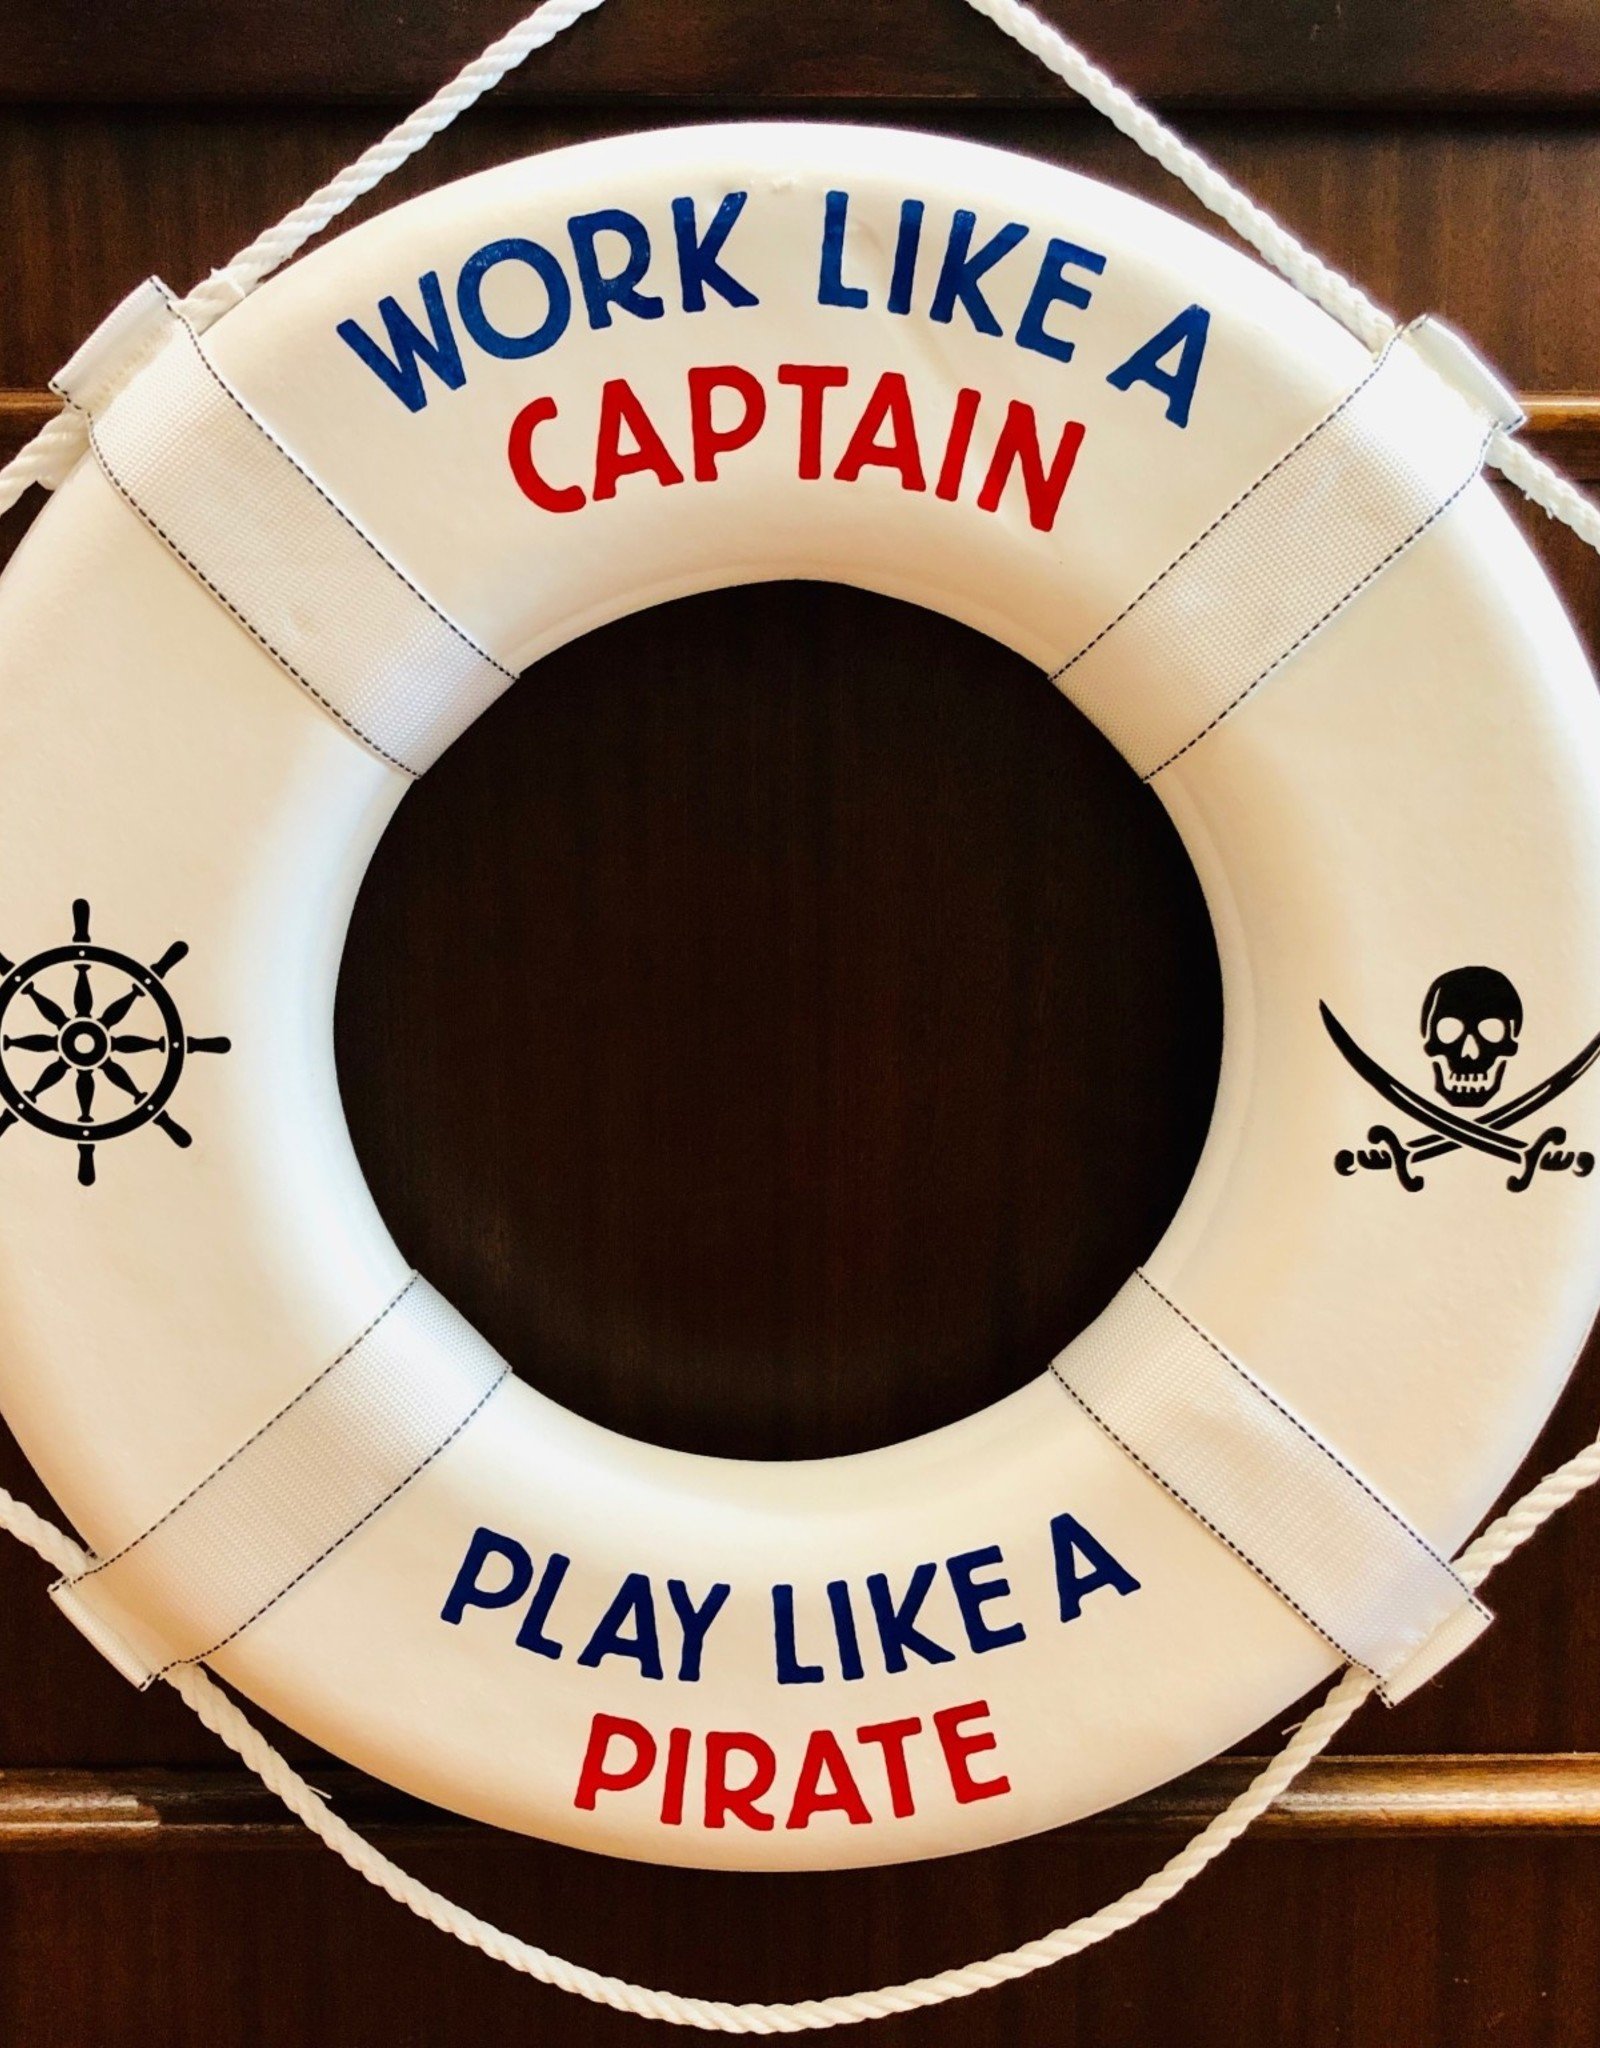 Jim Buoy CUSTOMIZED LIFE RING "WORK LIKE A CAPTAIN, PLAY LIKE A PIRATE"